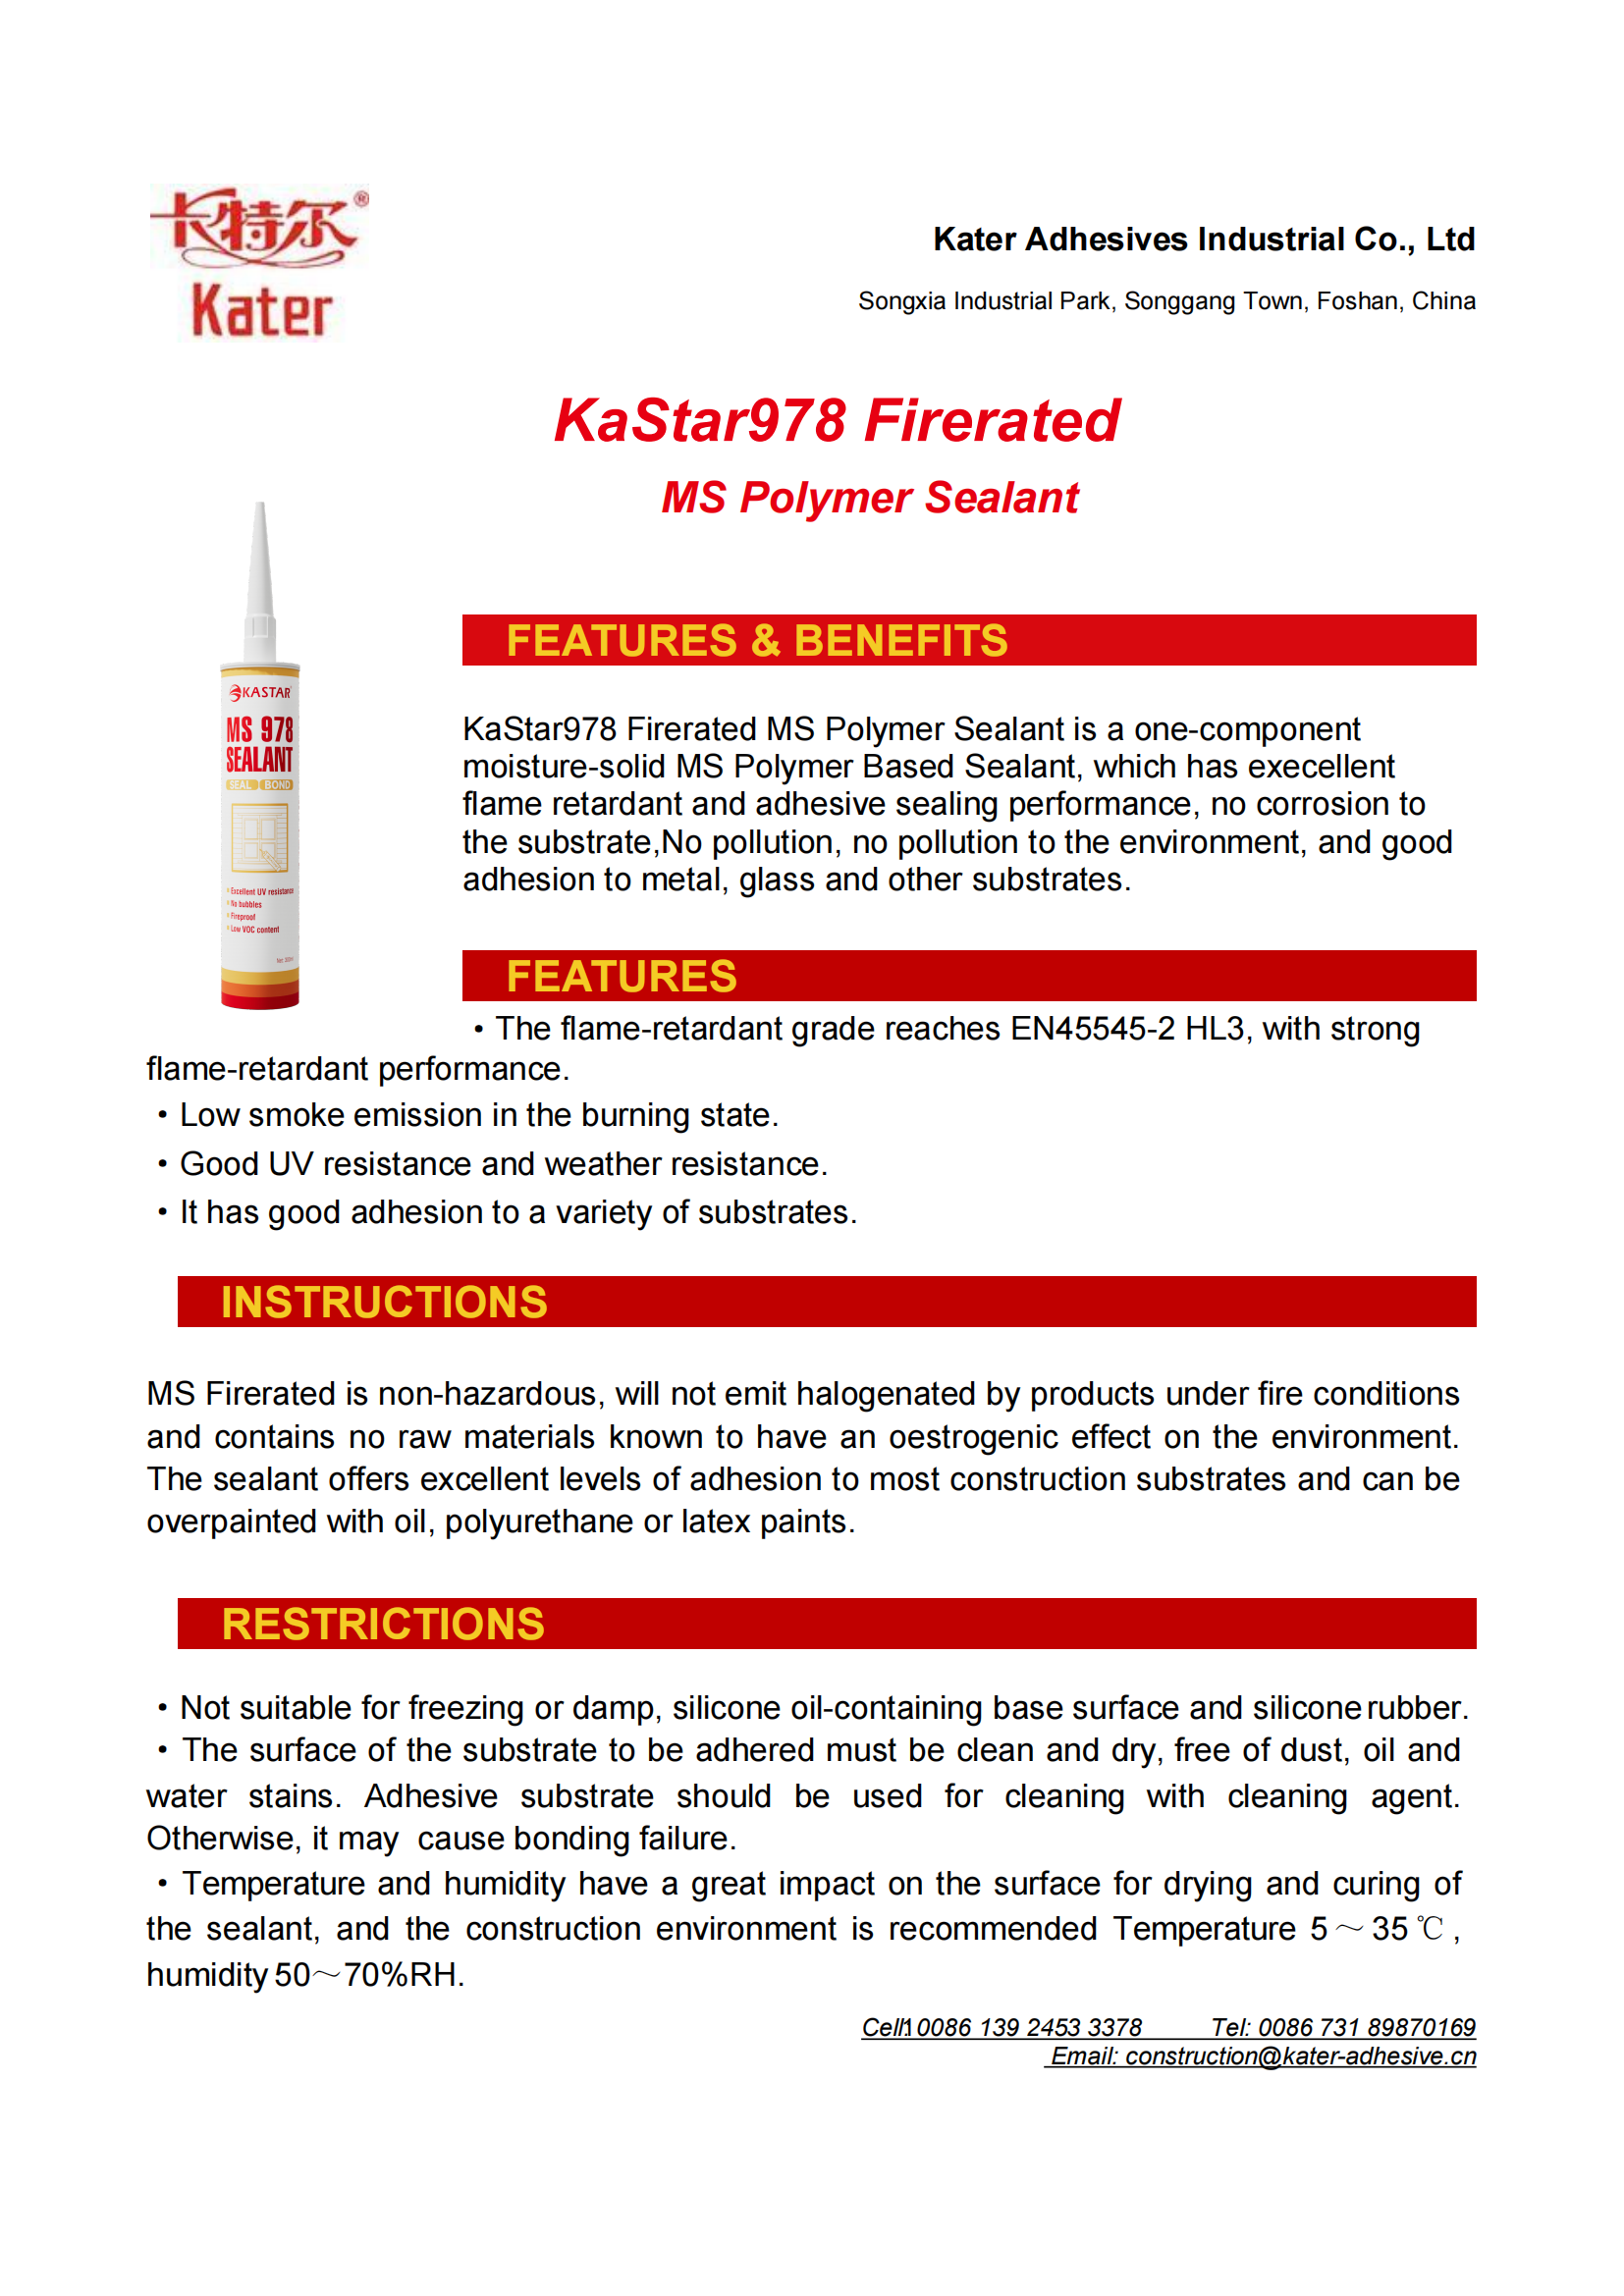 TDS- KASTAR978 Firerated MS Polymer Sealant_00.png